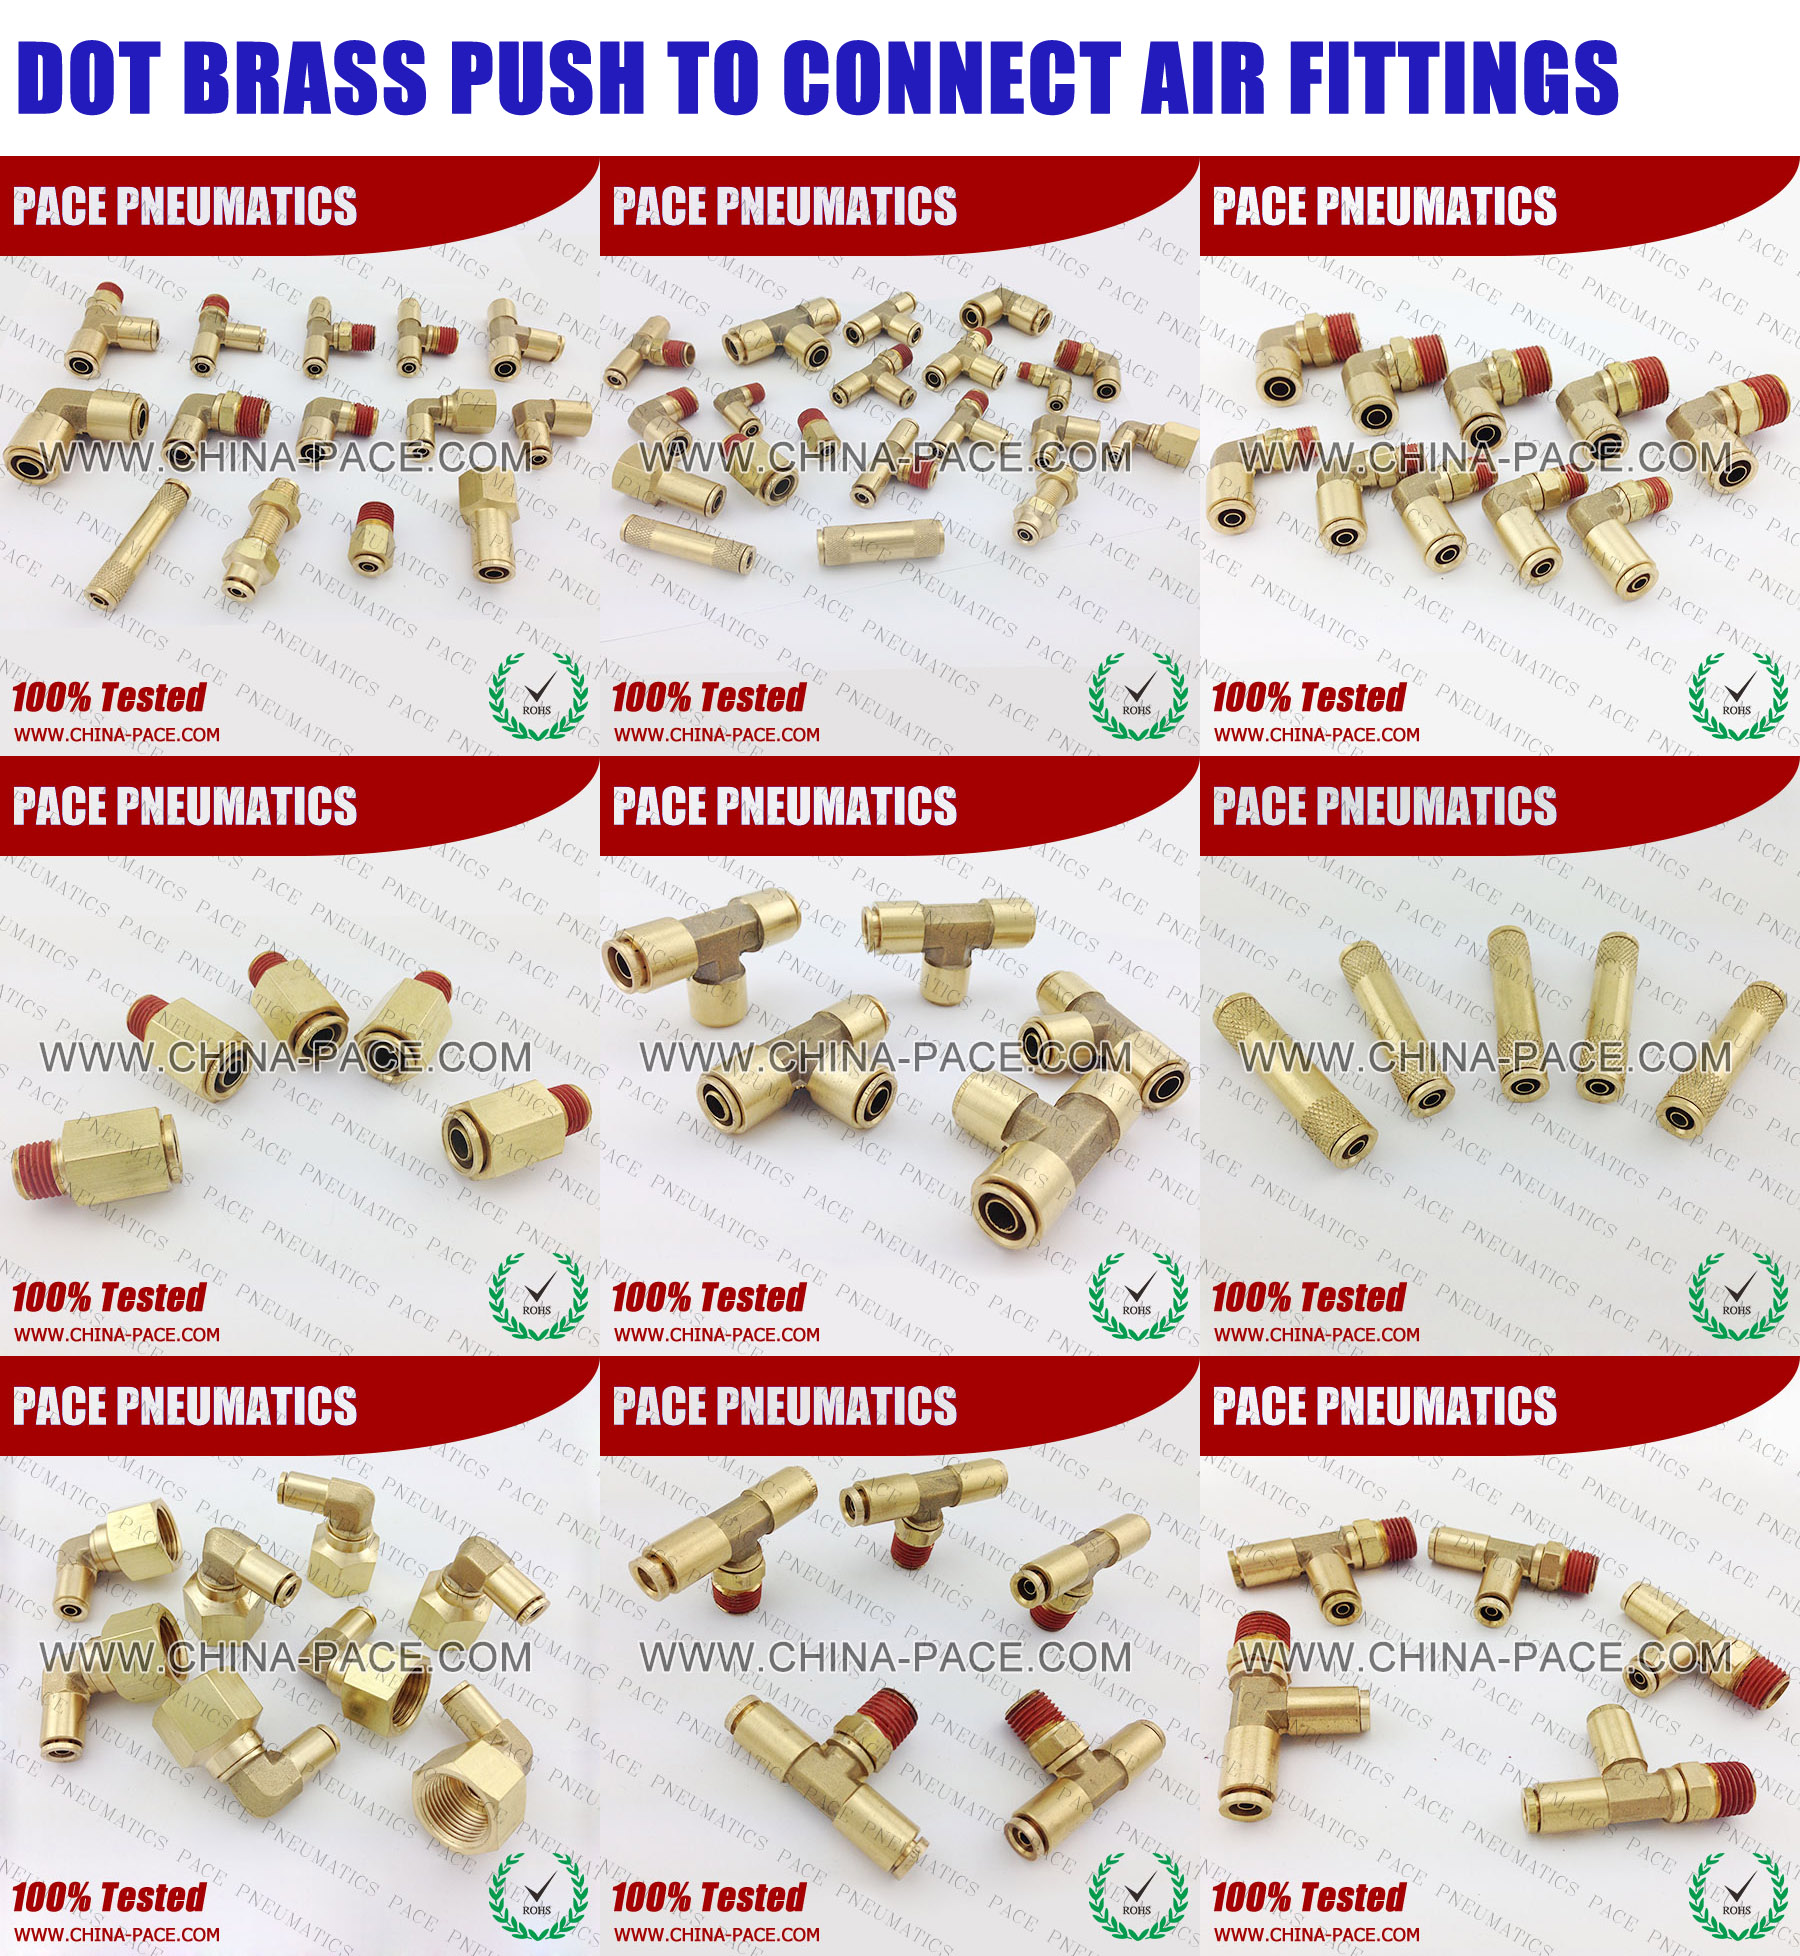 pneumatic fittings, air fittings, push to connect fittings, DOT fittings